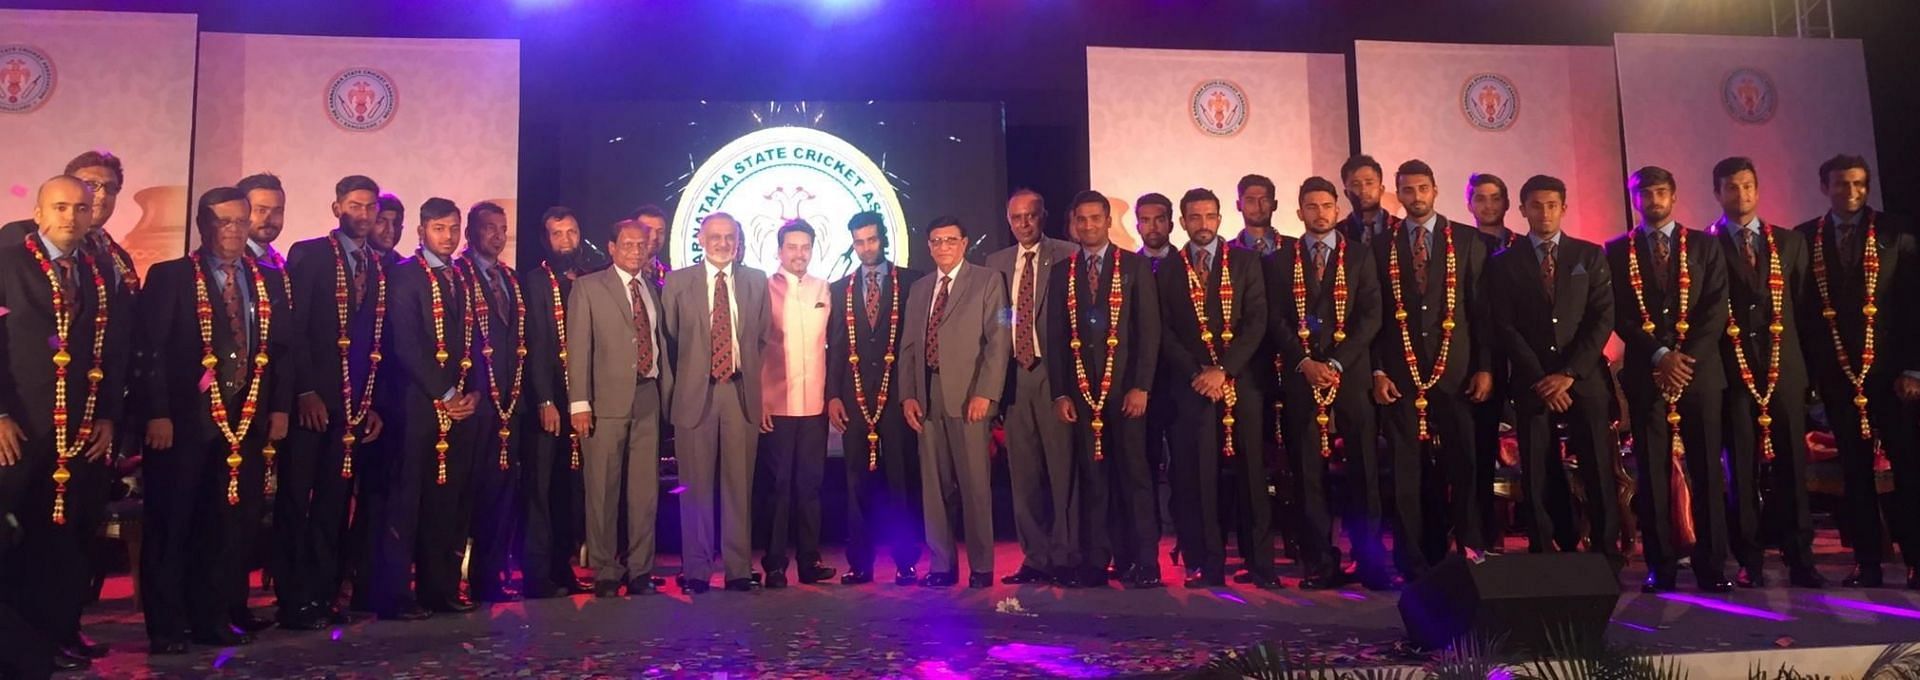 Karnataka Ranji Trophy team being felicitated after winning the Ranji Trophy two years in a row, in 2014-15 (Image: Twitter/Anurag Thakur)